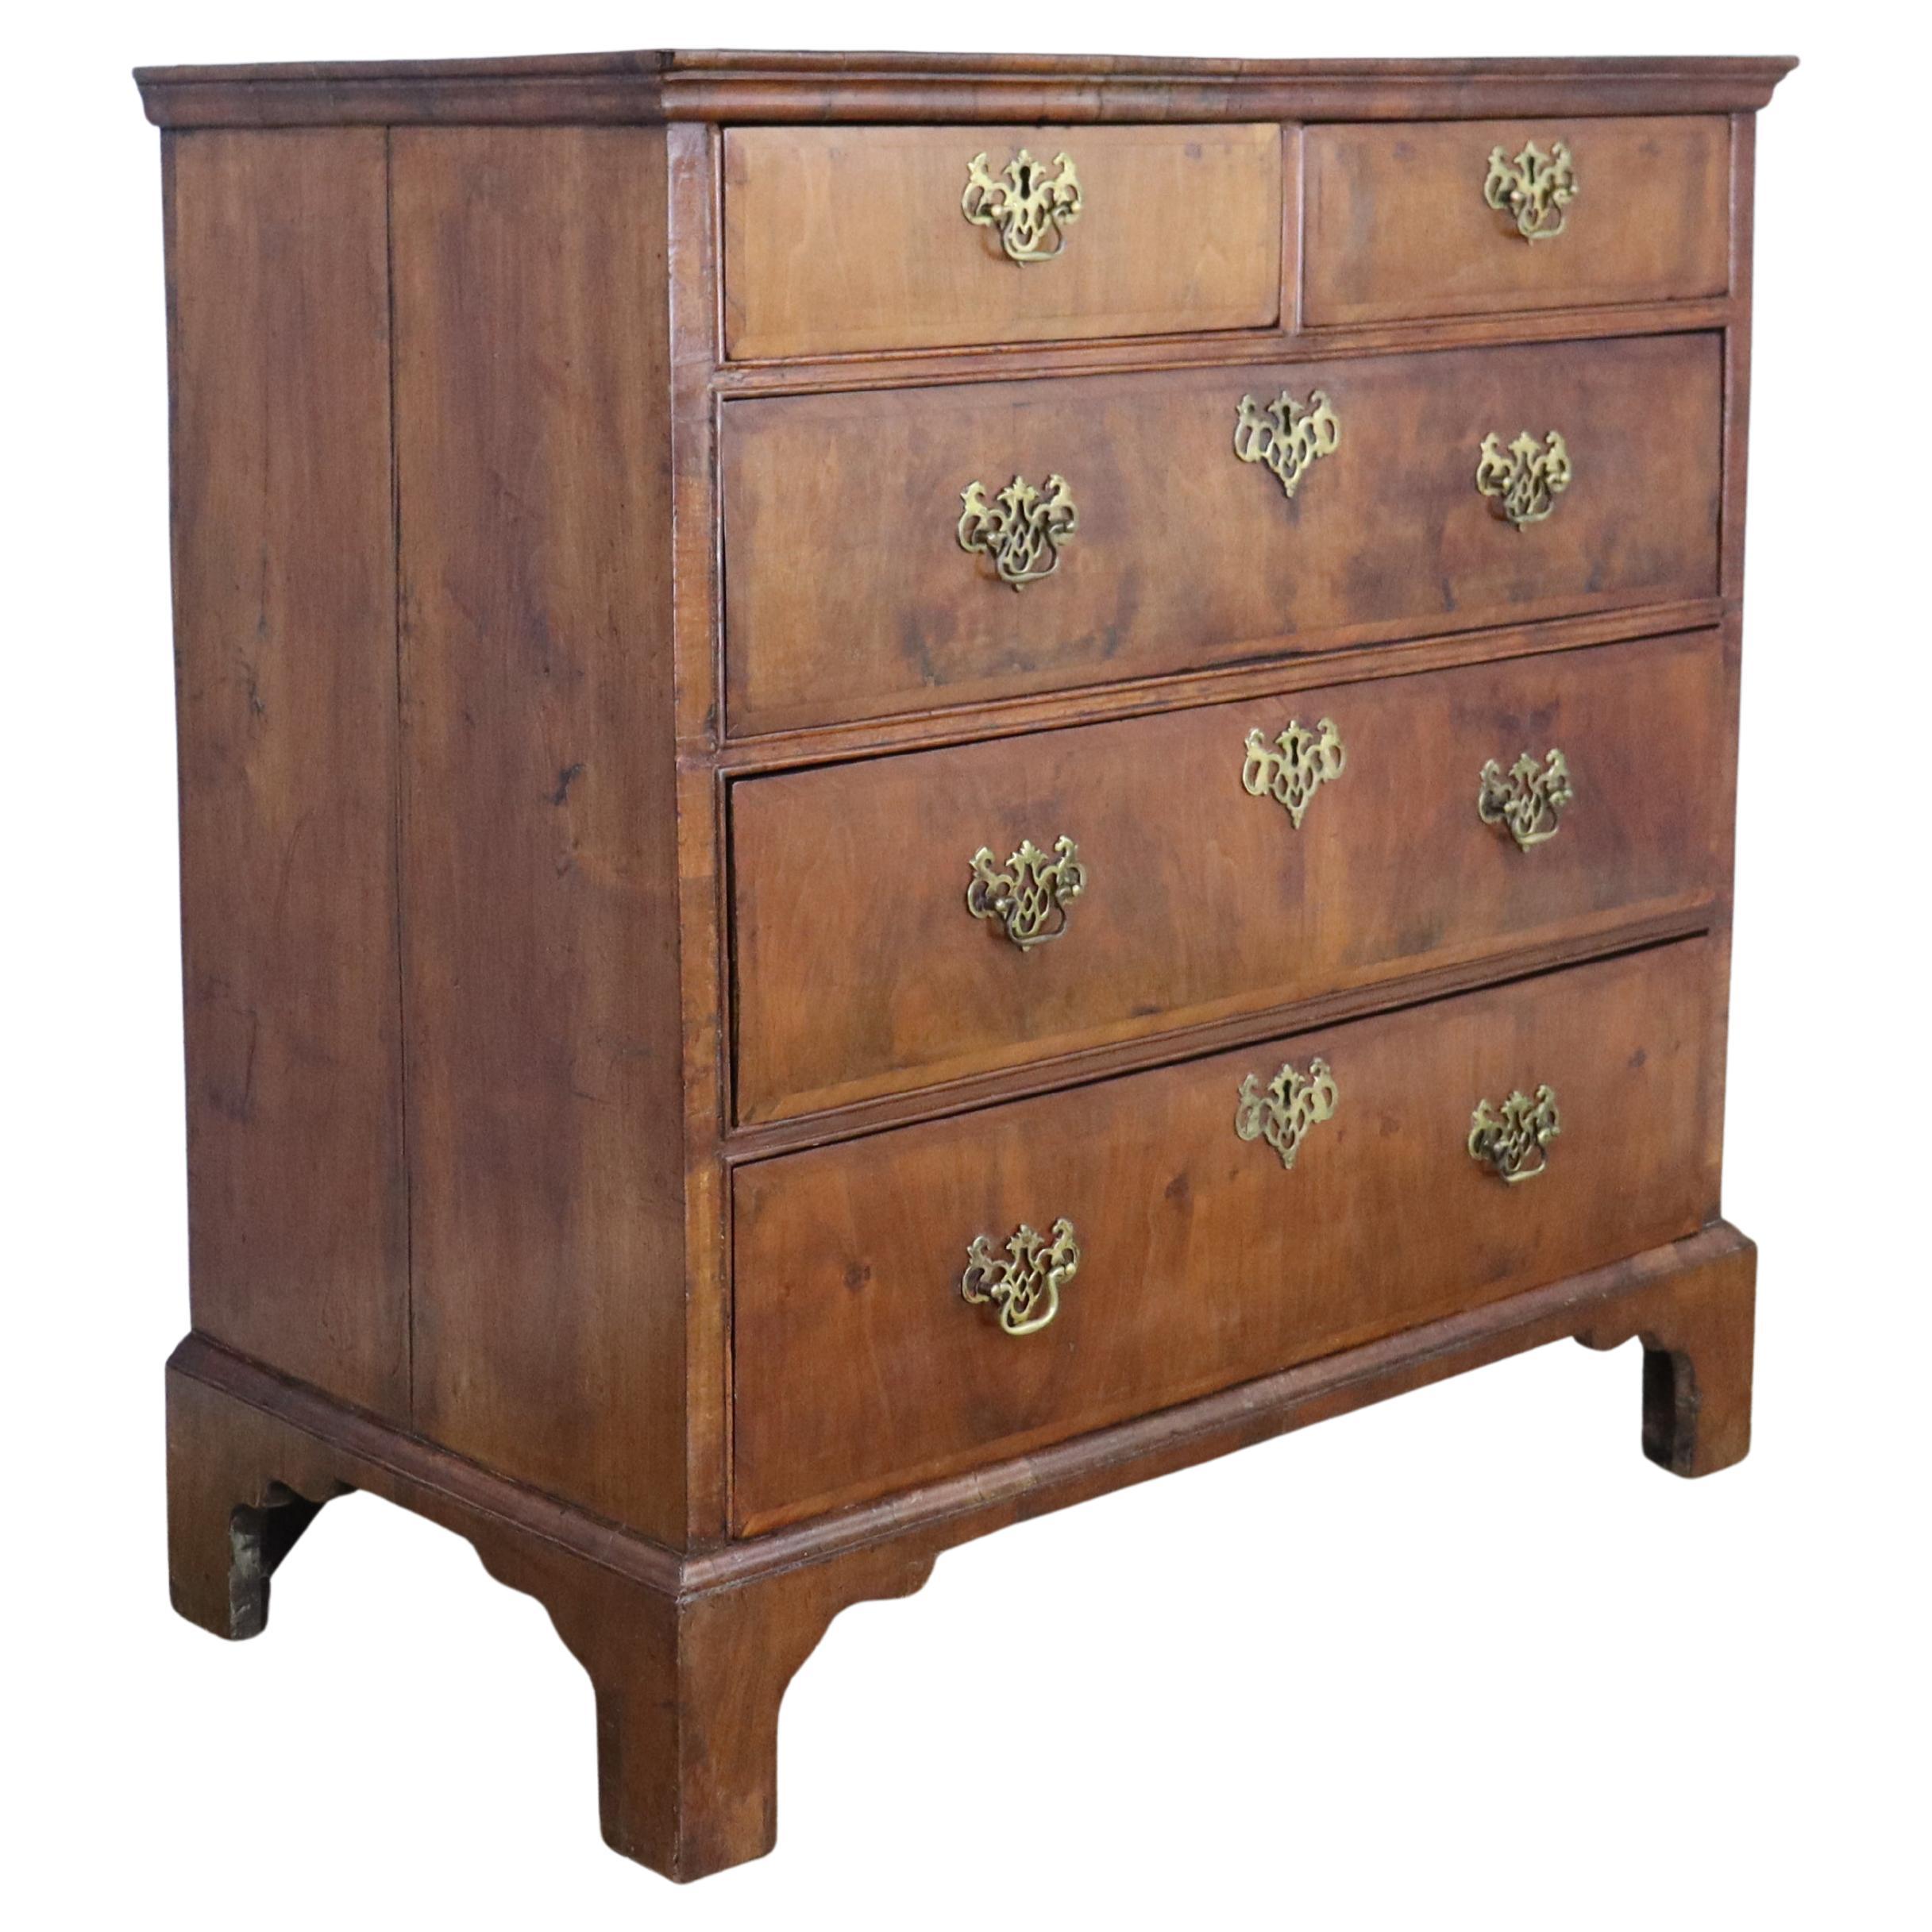 Early Burl Walnut Veneered Chest of Drawers,  George I Period For Sale